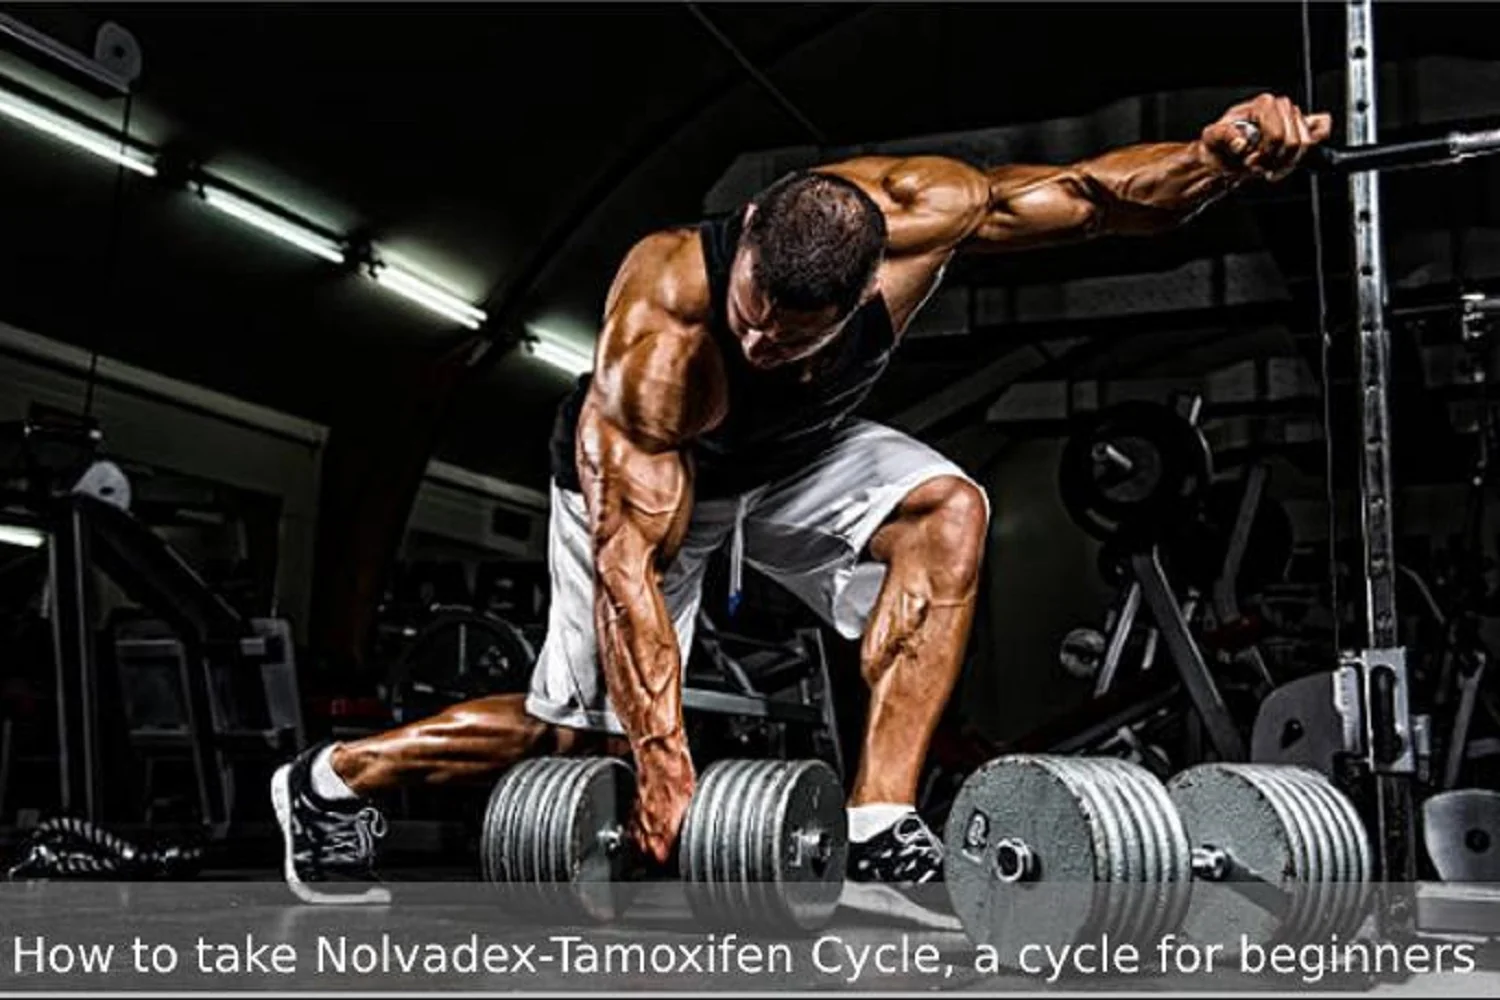 How to take Nolvadex